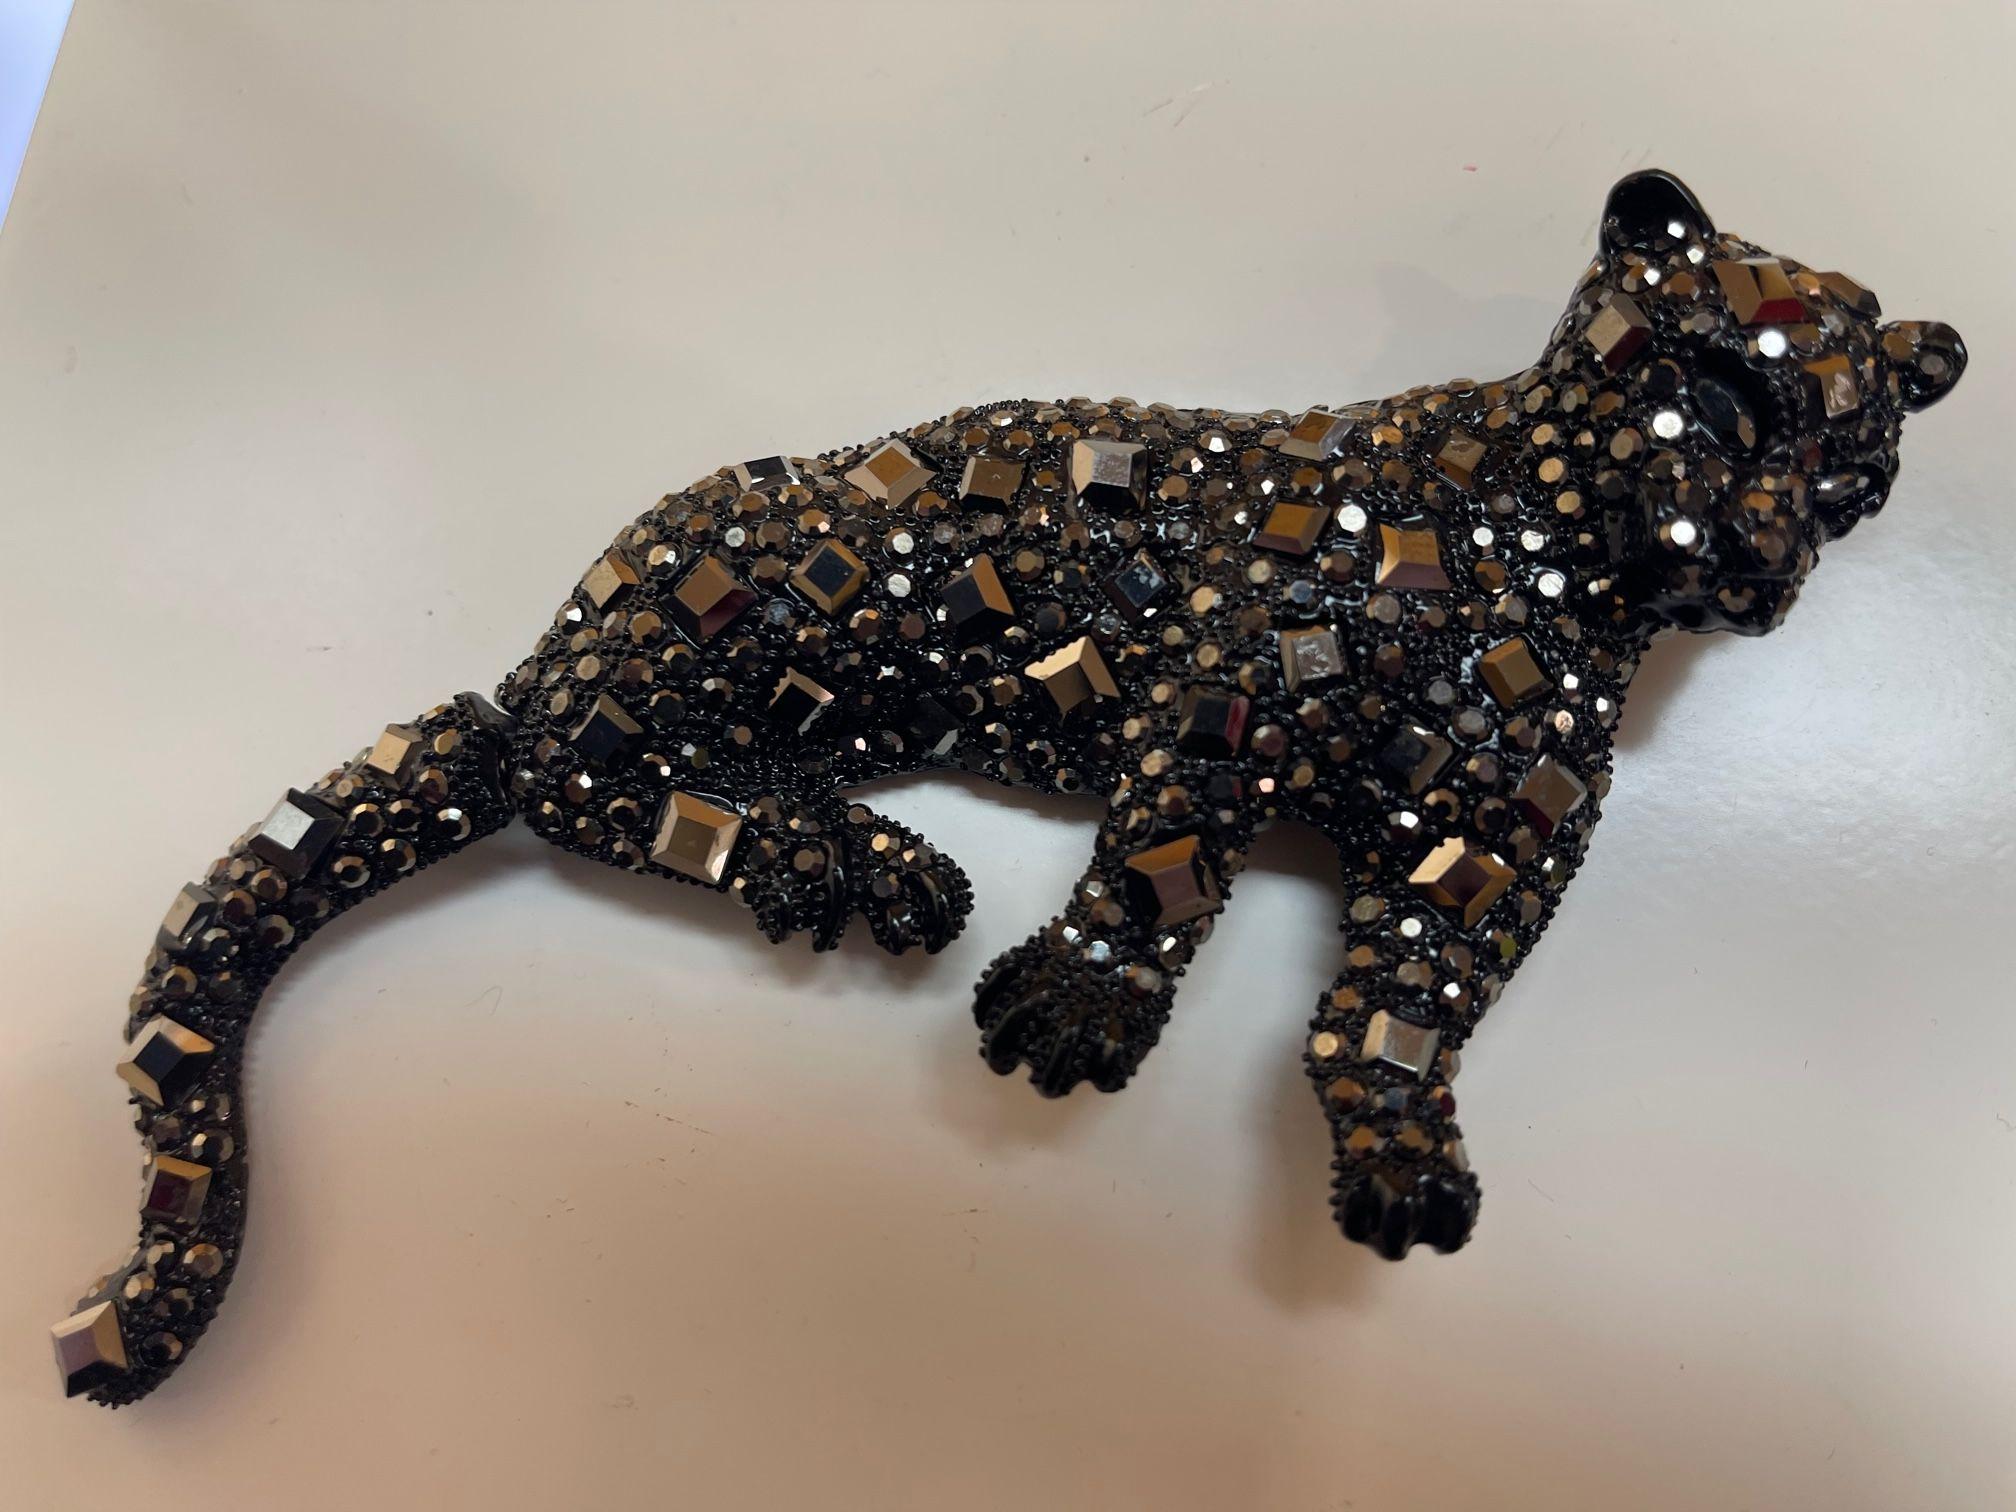 Simply Fabulous! Vintage Designer Big Black Cheetah Cat with articulated tail Brooch Pendant. Embellished with Sparkling Black Diamond and Round shaped faux Crystals. Dynamic in all Sparkling Black! Approx. 5